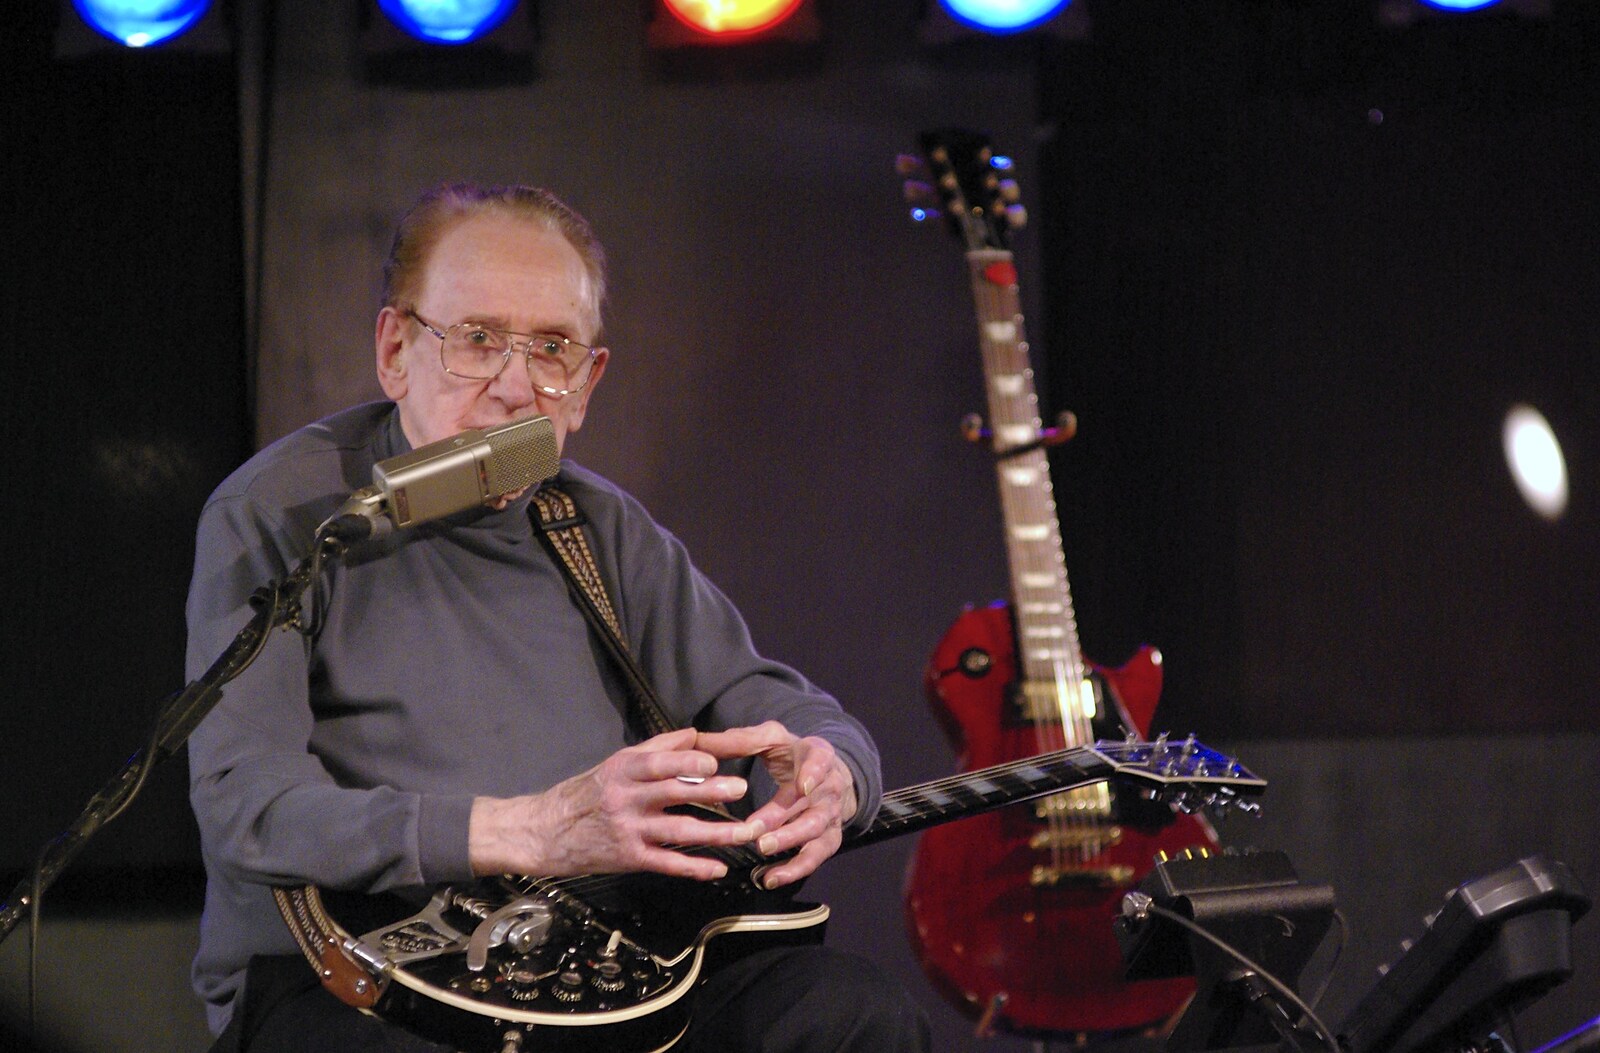 Les Paul tells one of his anecdotes from A Central Park Marathon, Les Paul at the Iridium Club and an Empire State Sunset, New York, US - 25th March 2007